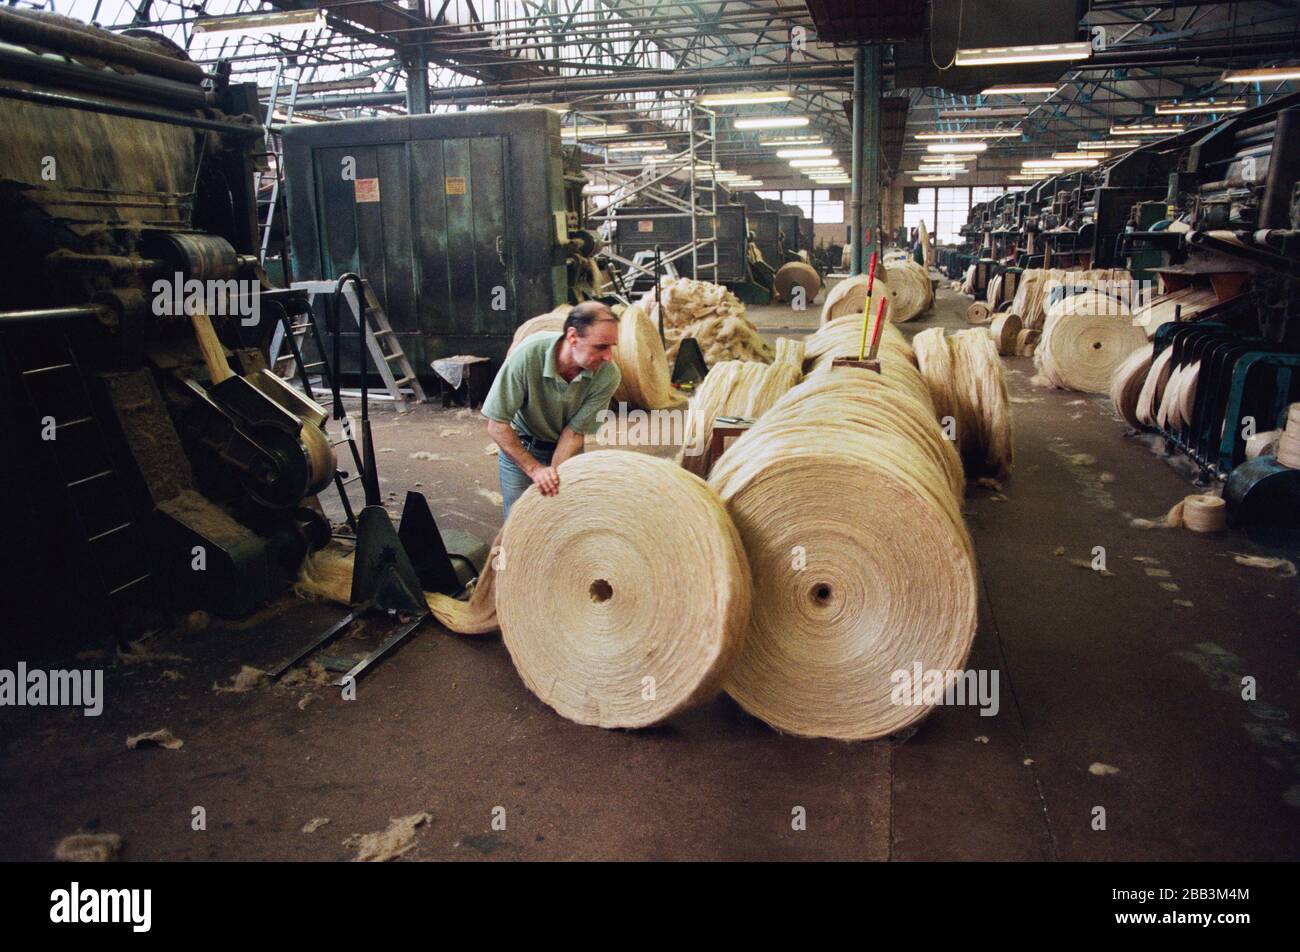 A worker rolling a circular bale of jute at Tay Spinners mill in Dundee, Scotland. This factory was the last jute spinning mill in Europe when it closed for the final time in 1998. The city of Dundee had been famous throughout history for the three 'Js' - jute, jam and journalism. Stock Photo